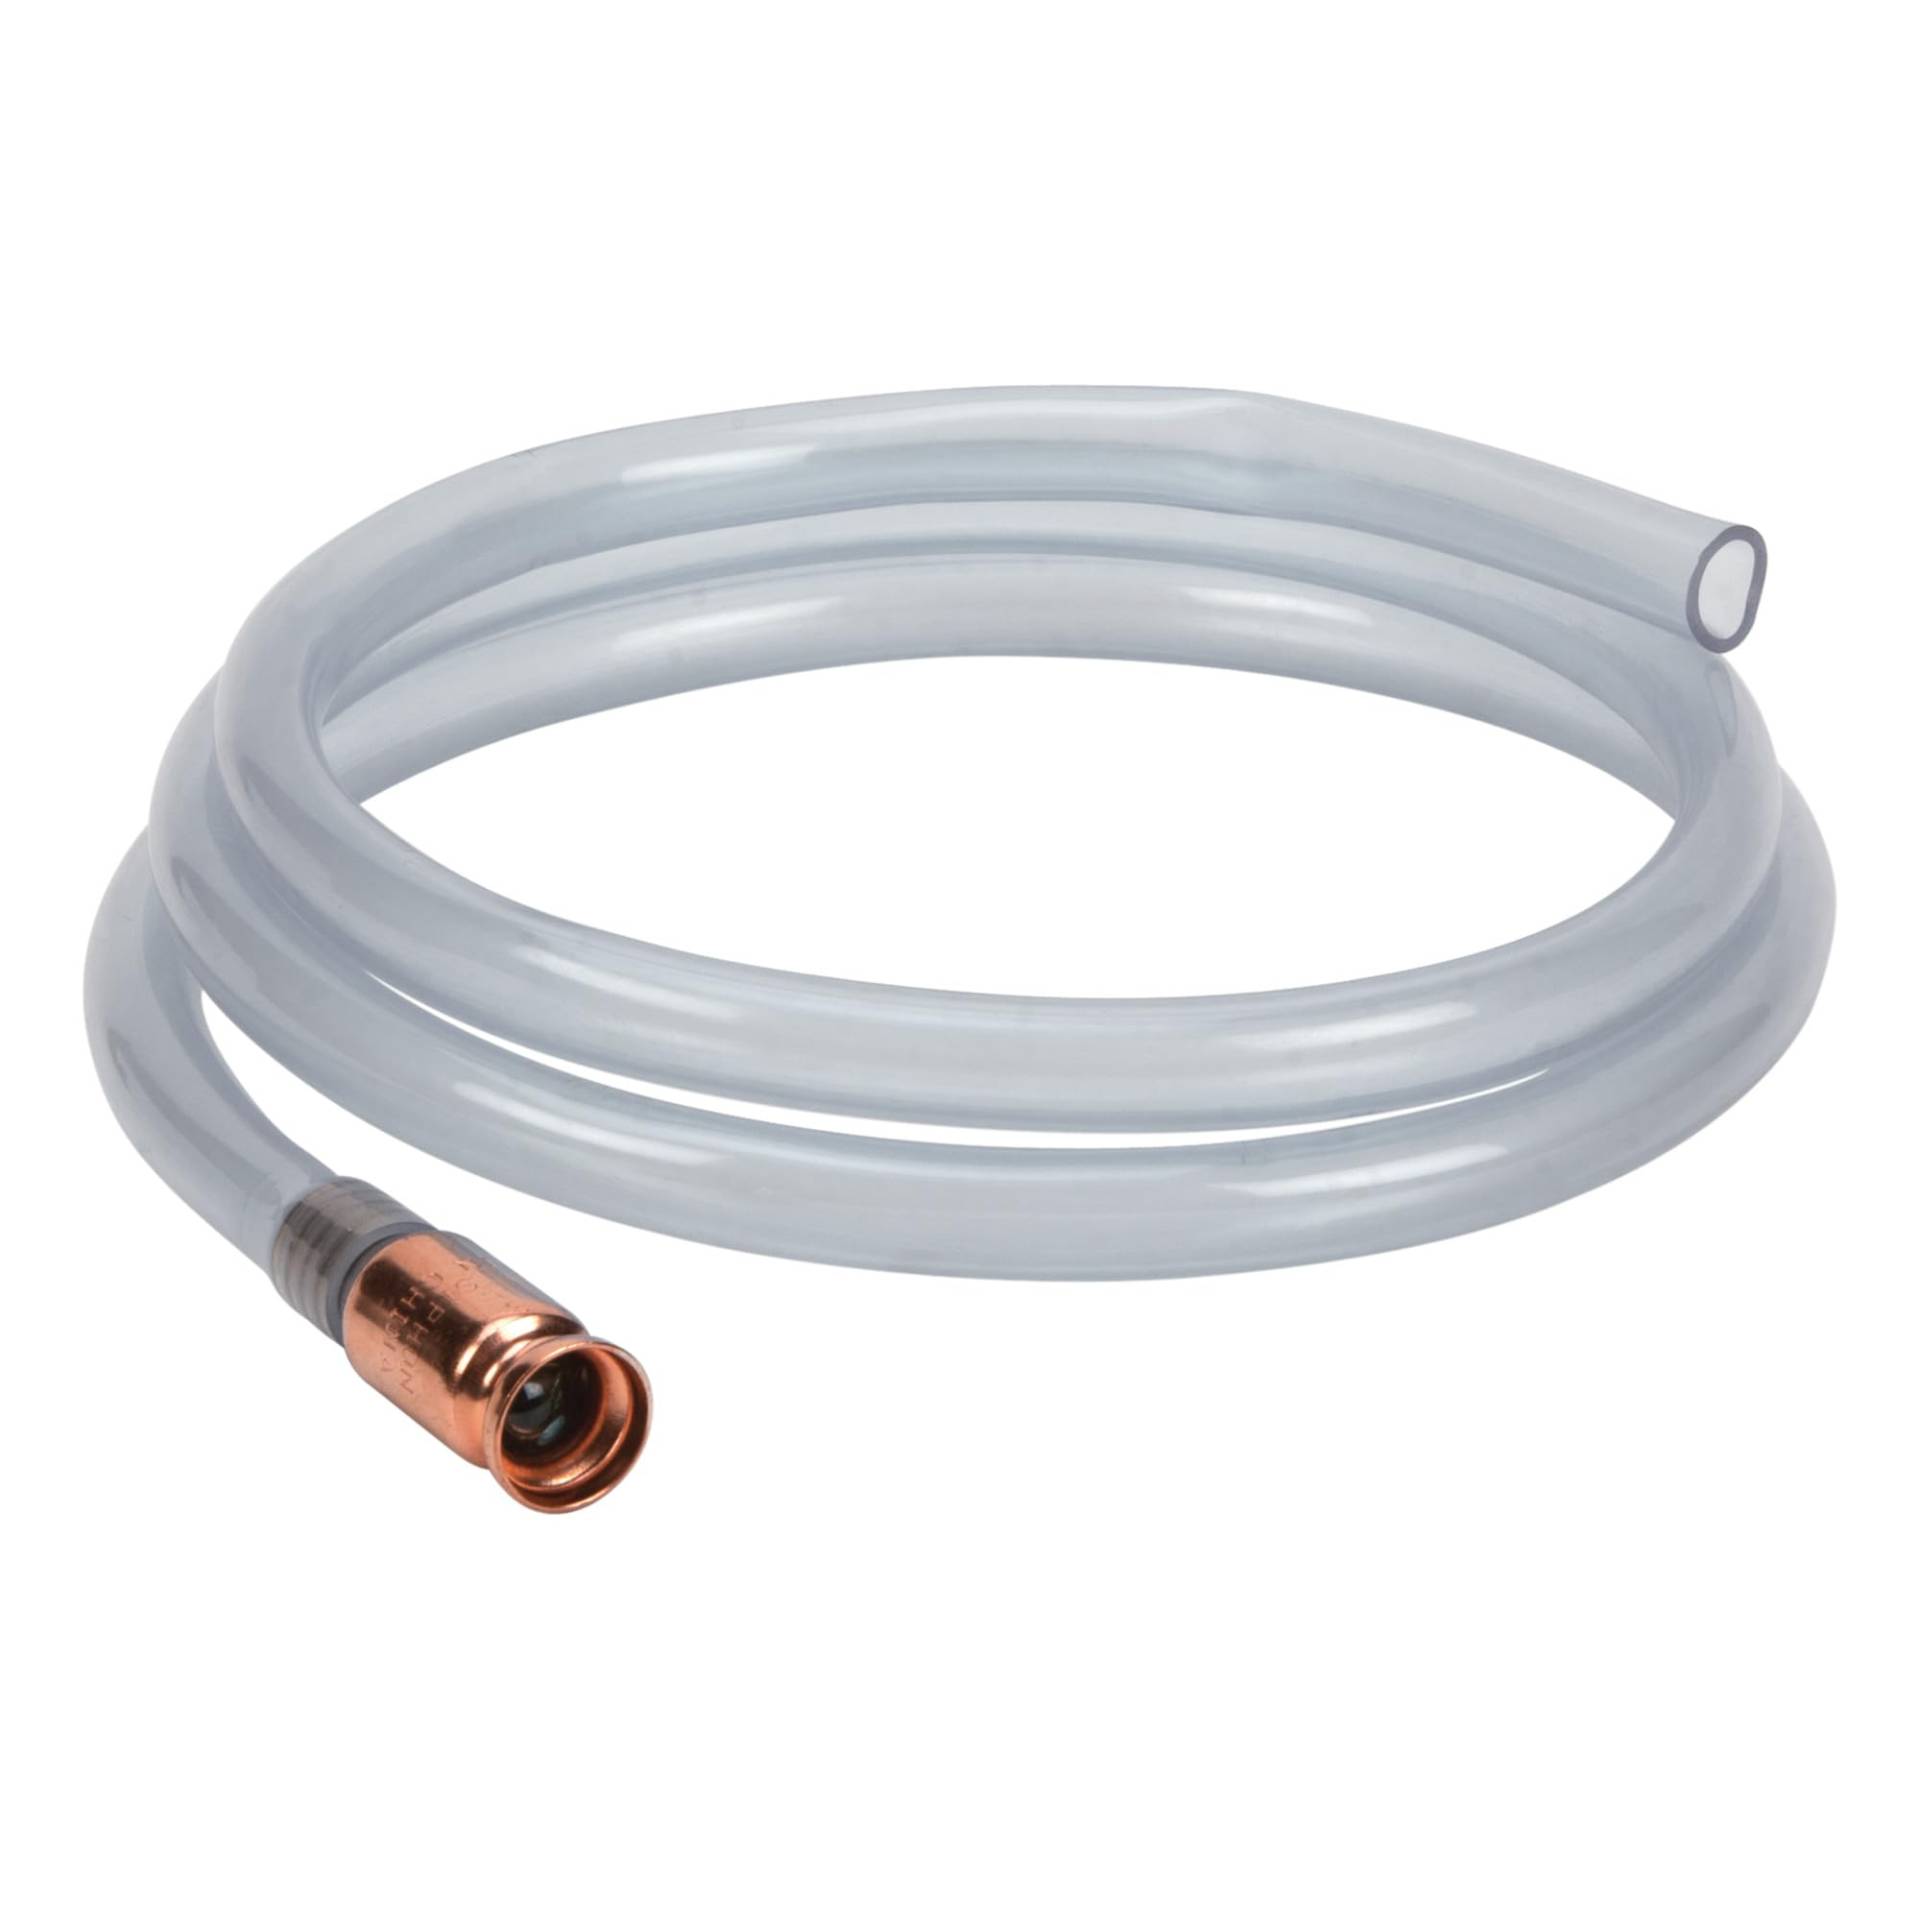 Performance Tool W54154 Anti Static Shaker Siphon Hose 3.5 Gallons Per Minute von PERFORMANCE TOOL